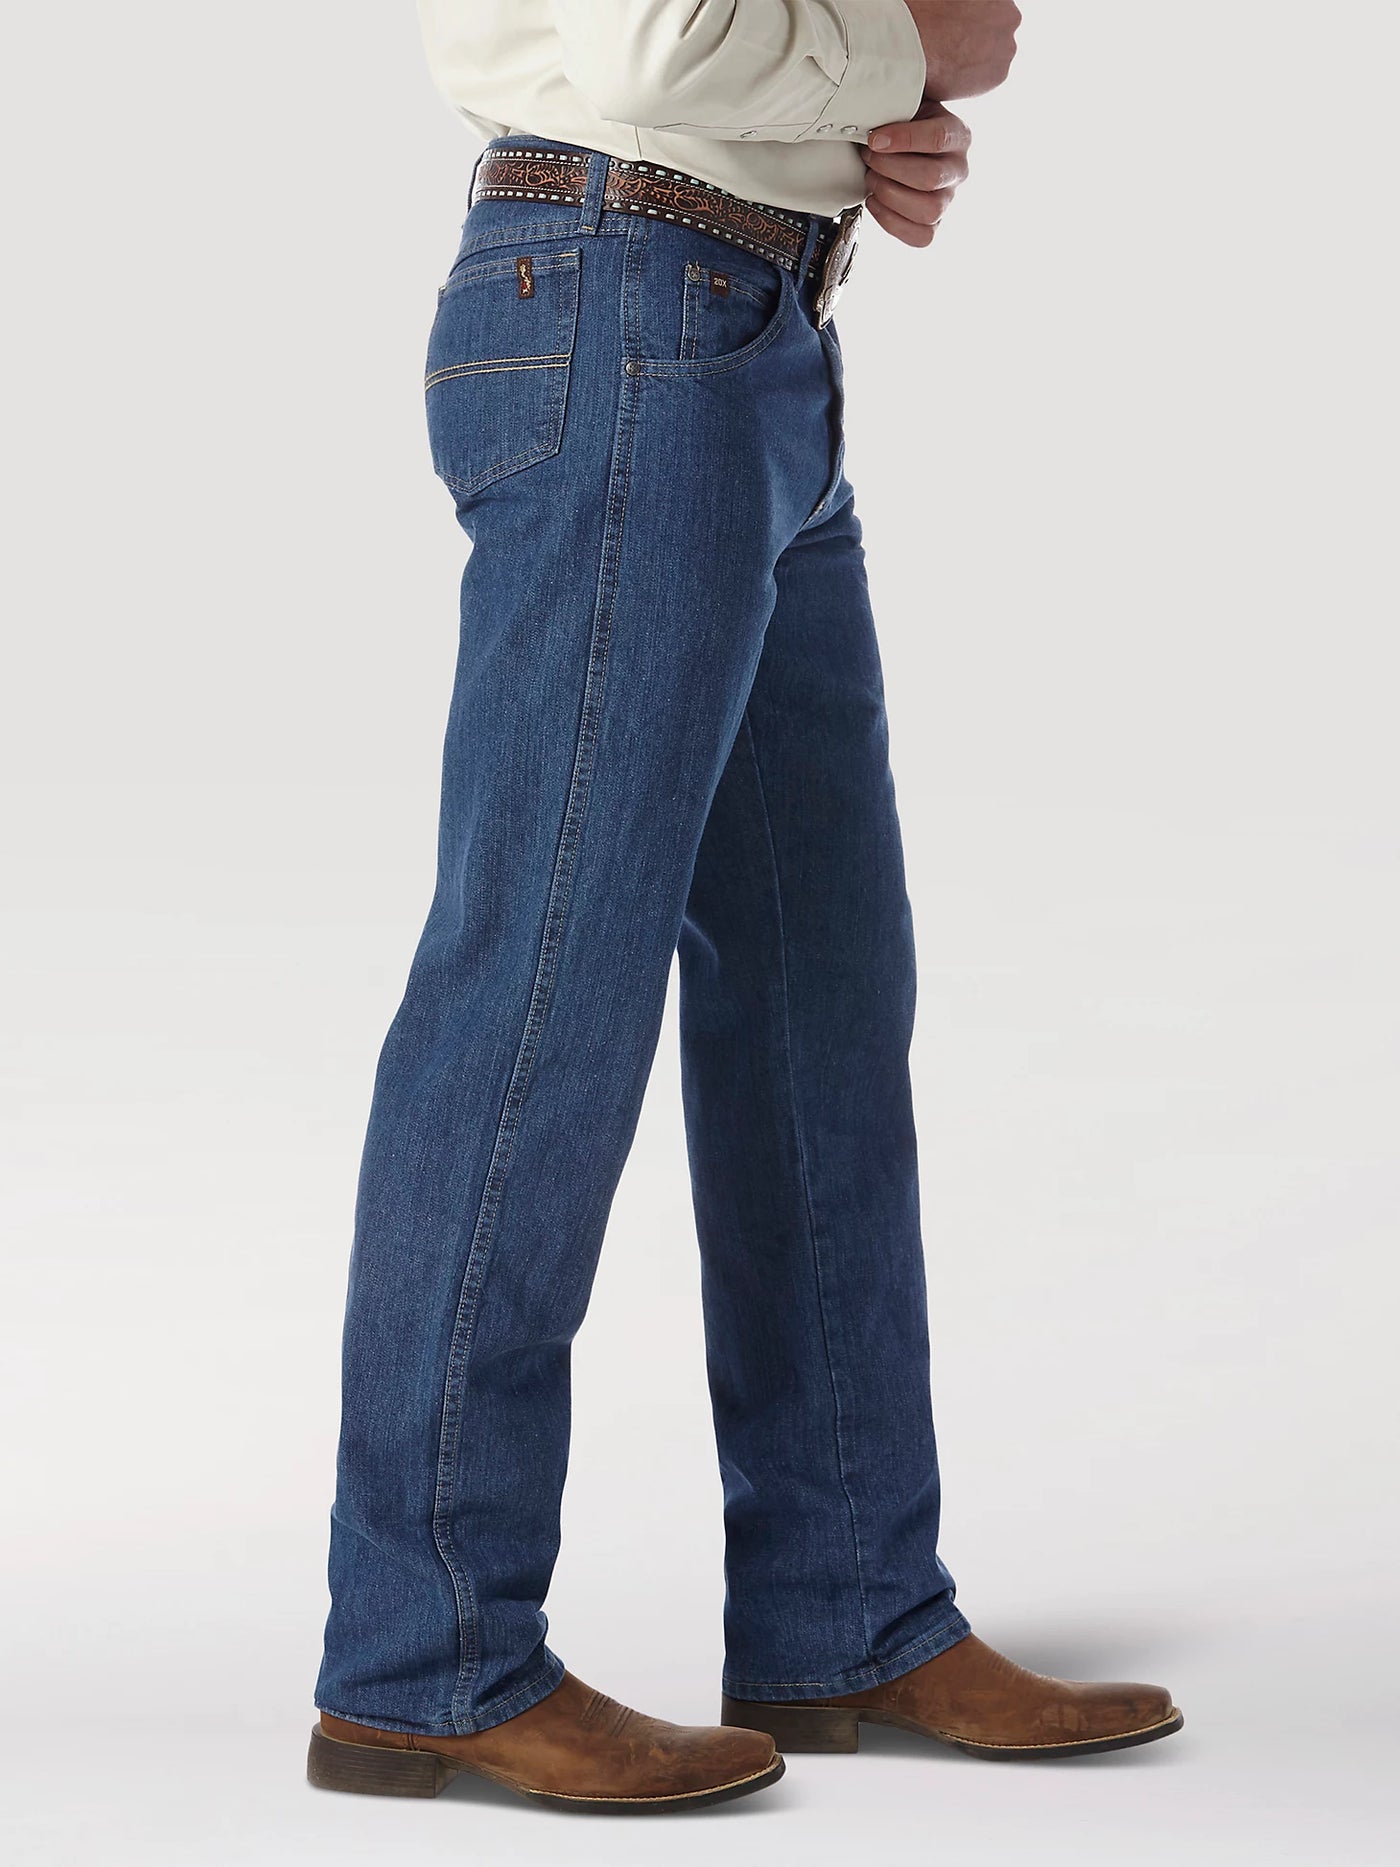 Wrangler 20X Men's NO. 23 Relaxed Fit In Vintage Blue